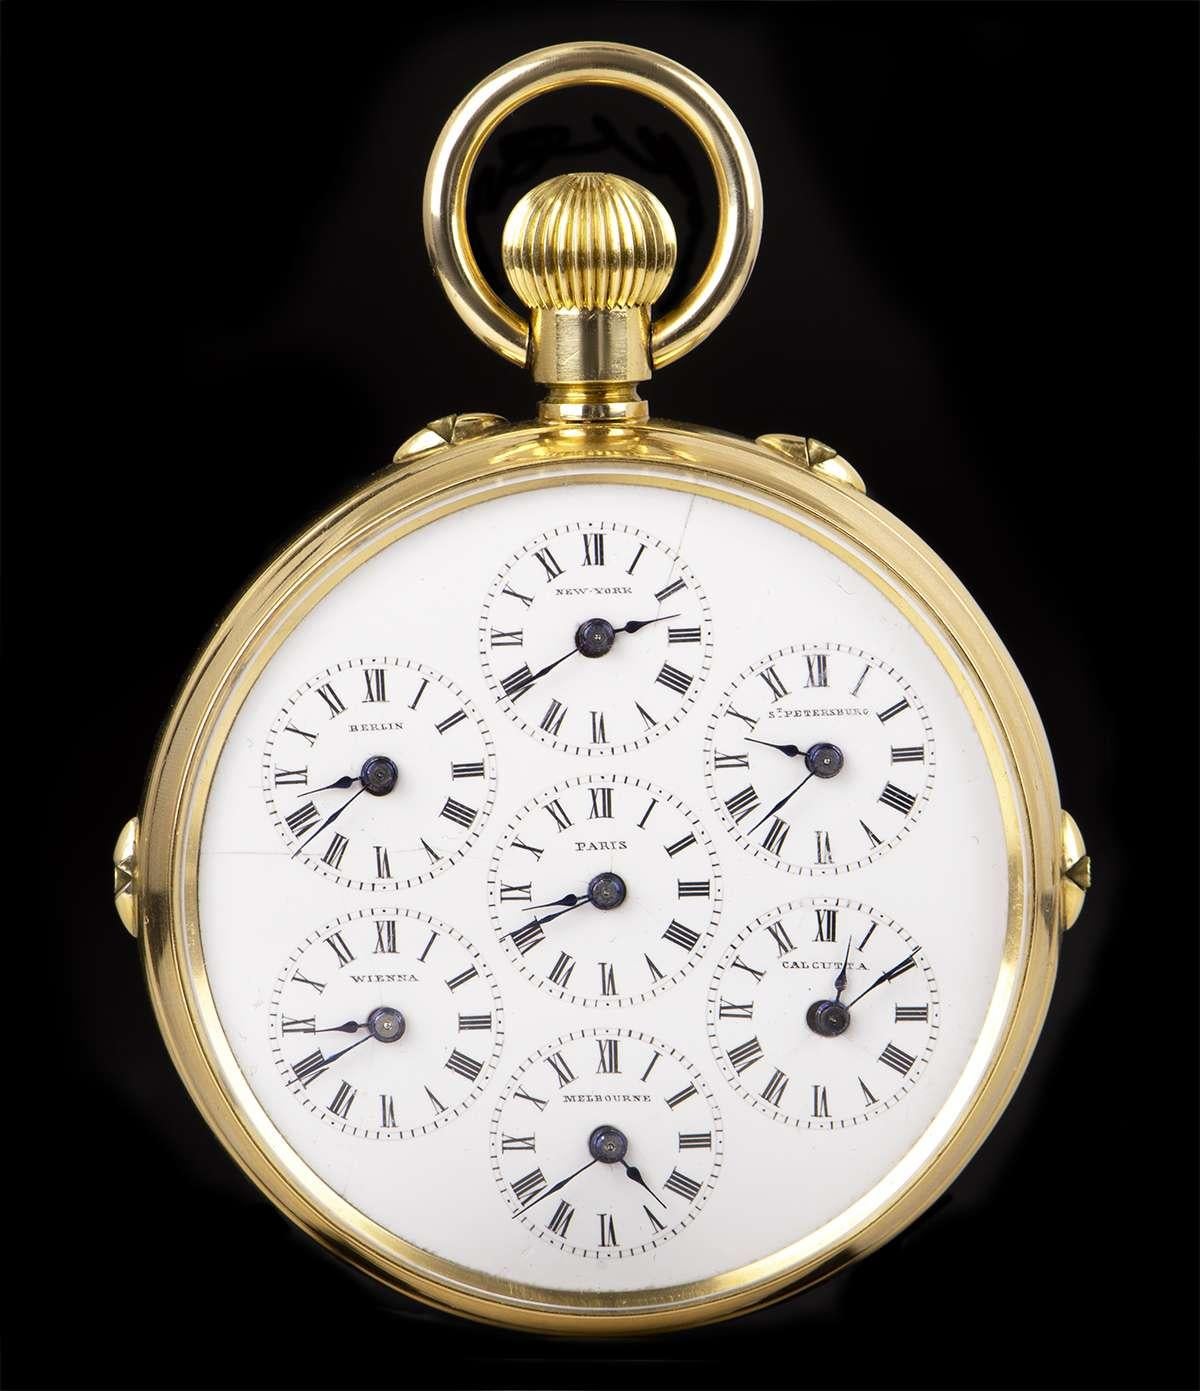 A Rare 18k Yellow Gold Double Sided World Time Full Calendar Vintage Gents Pocket Watch, white enamel dial with roman numerals, date sub-dial at 3 0'clock, month and small seconds sub-dial at 6 0'clock, weekday sub-dial at 9 0'clock, moonphase